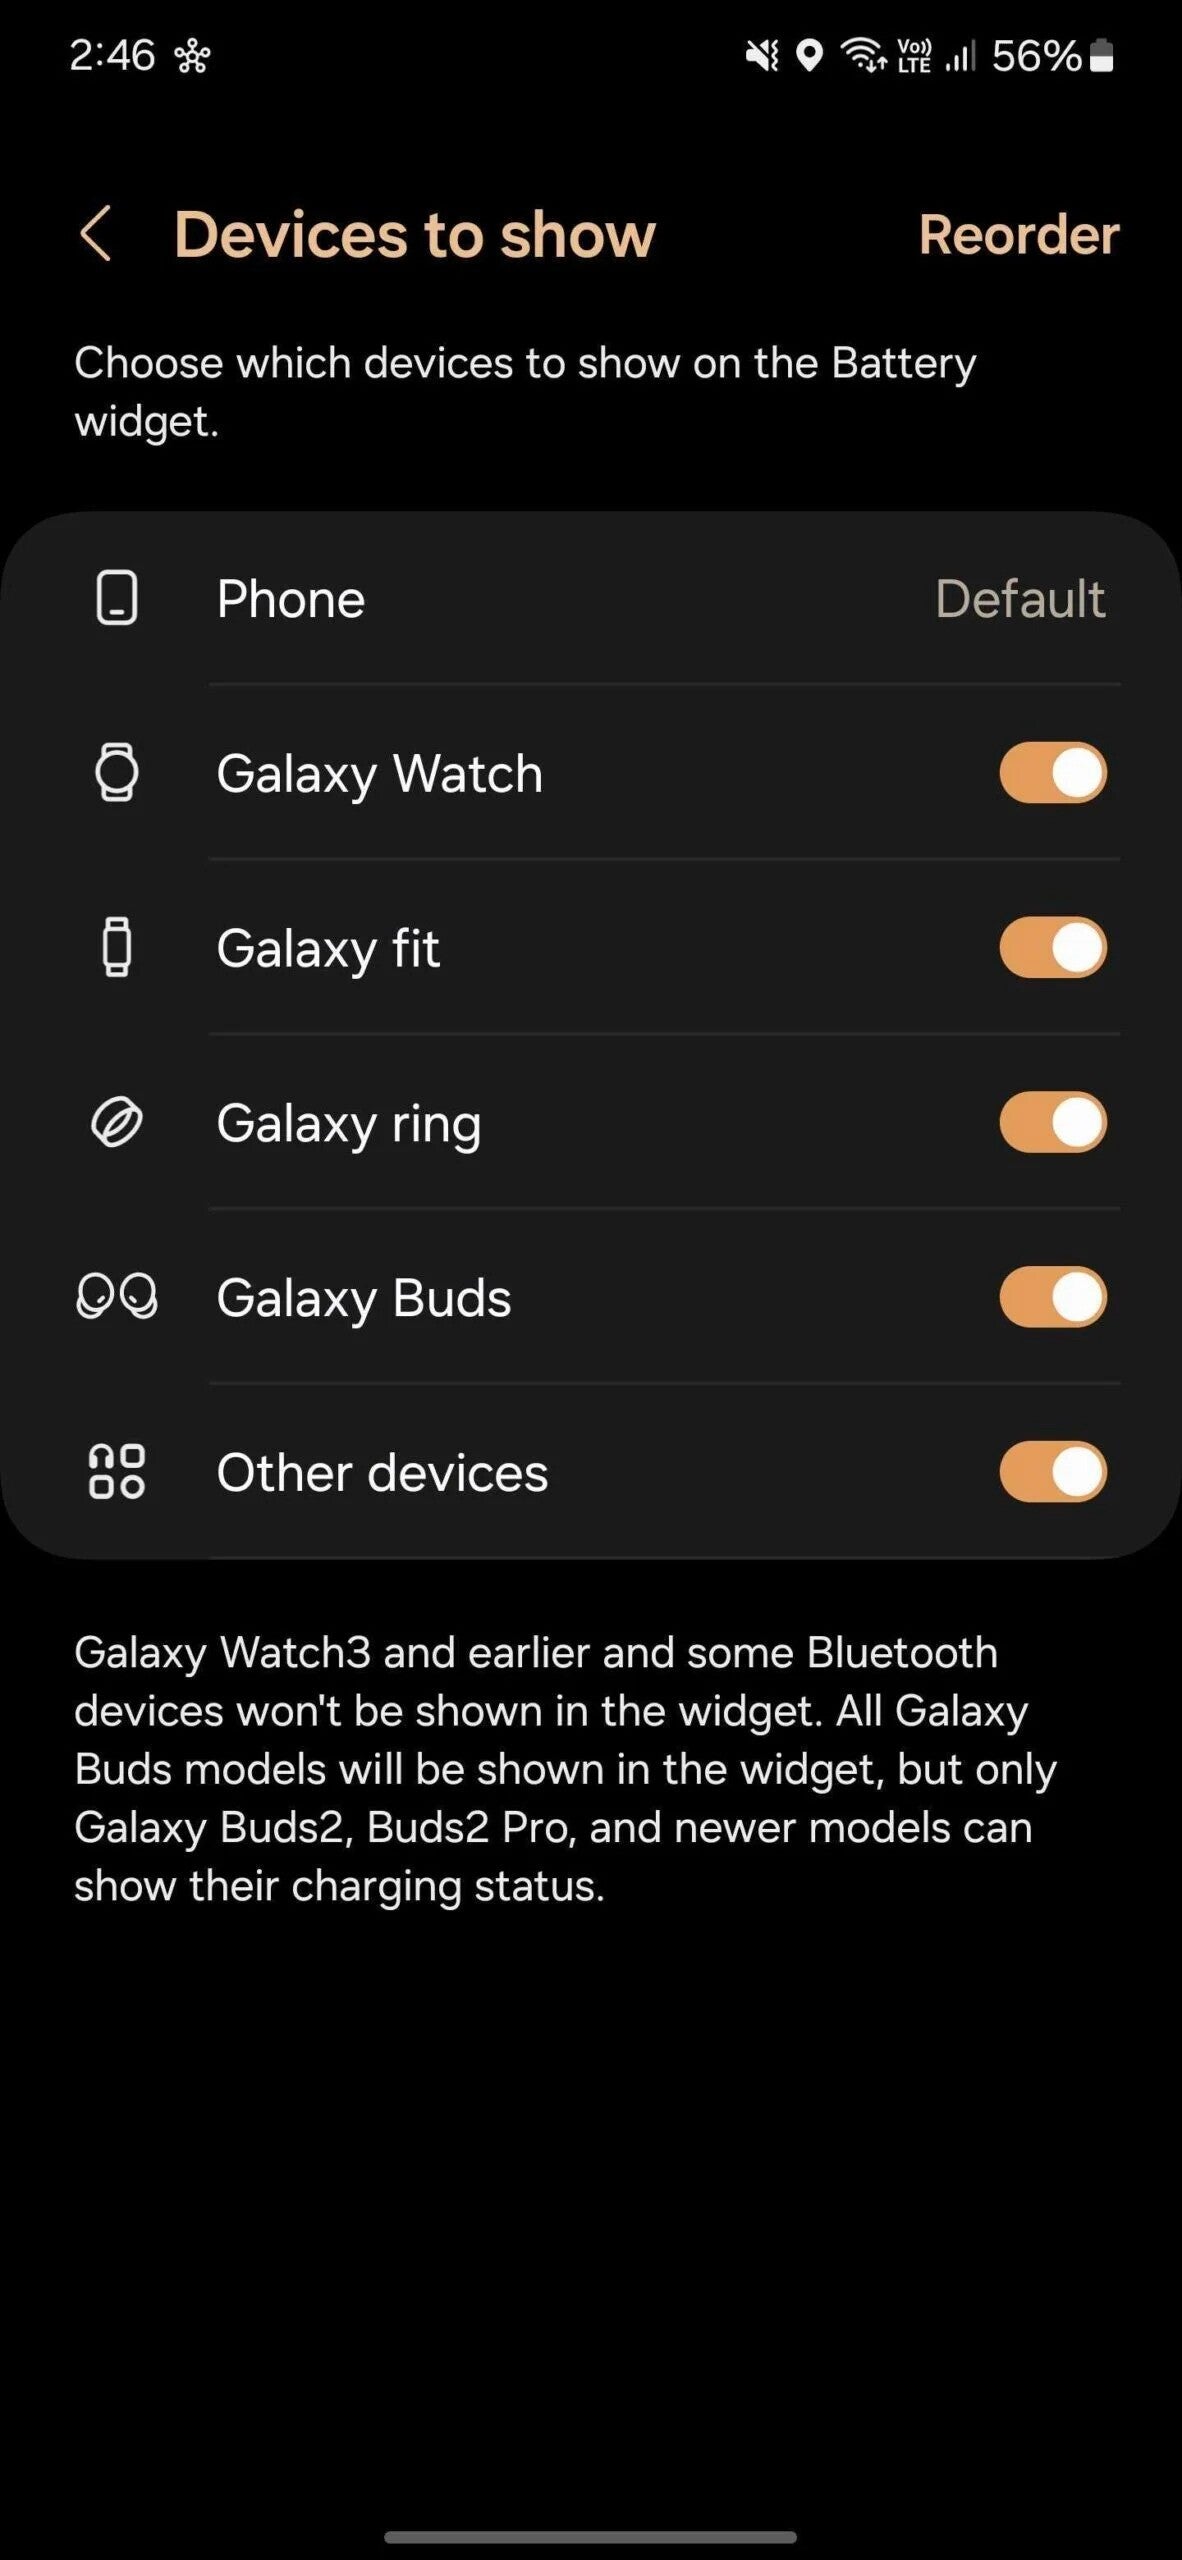 Galaxy Ring seen in Samsung's Battery widget (Image credit – SamMobile) – Samsung Galaxy Ring launch primed as Battery widget hints at arrival